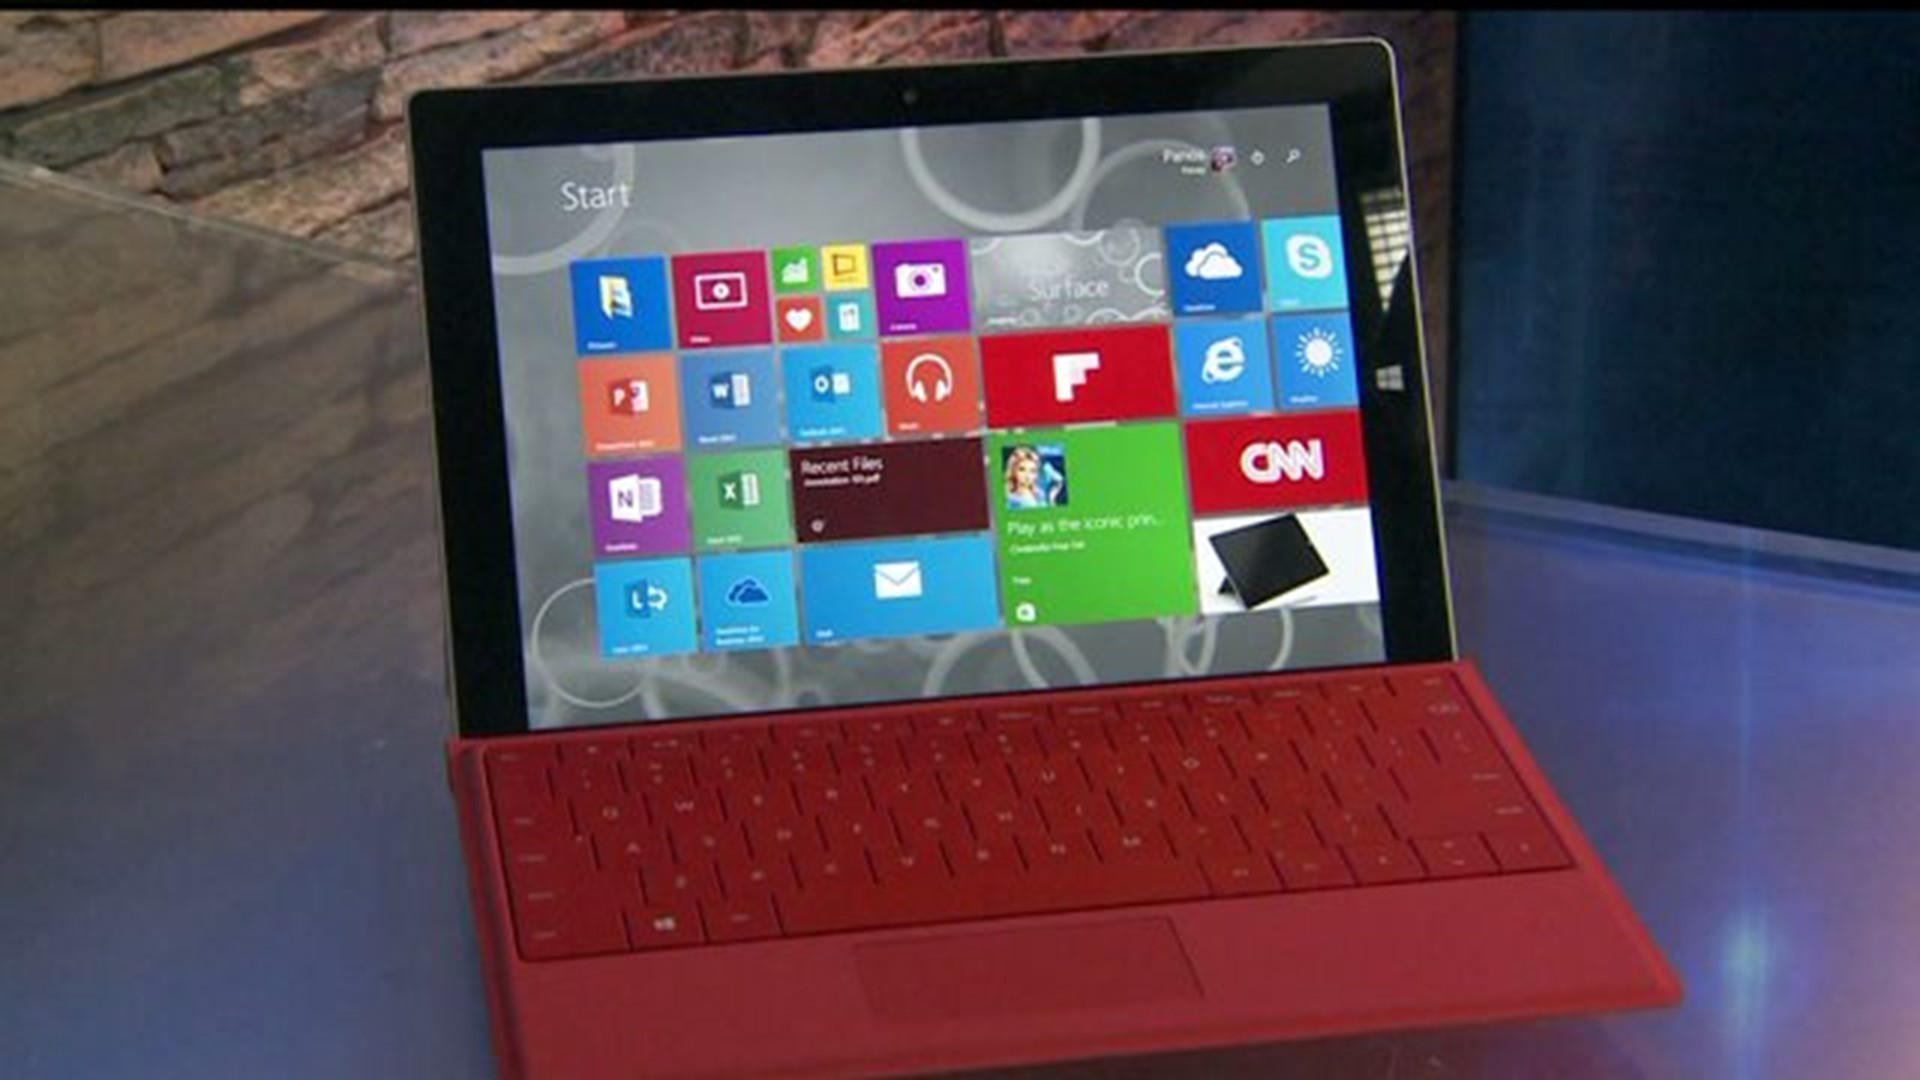 Tech Report: A look at the Microsoft Surface 3